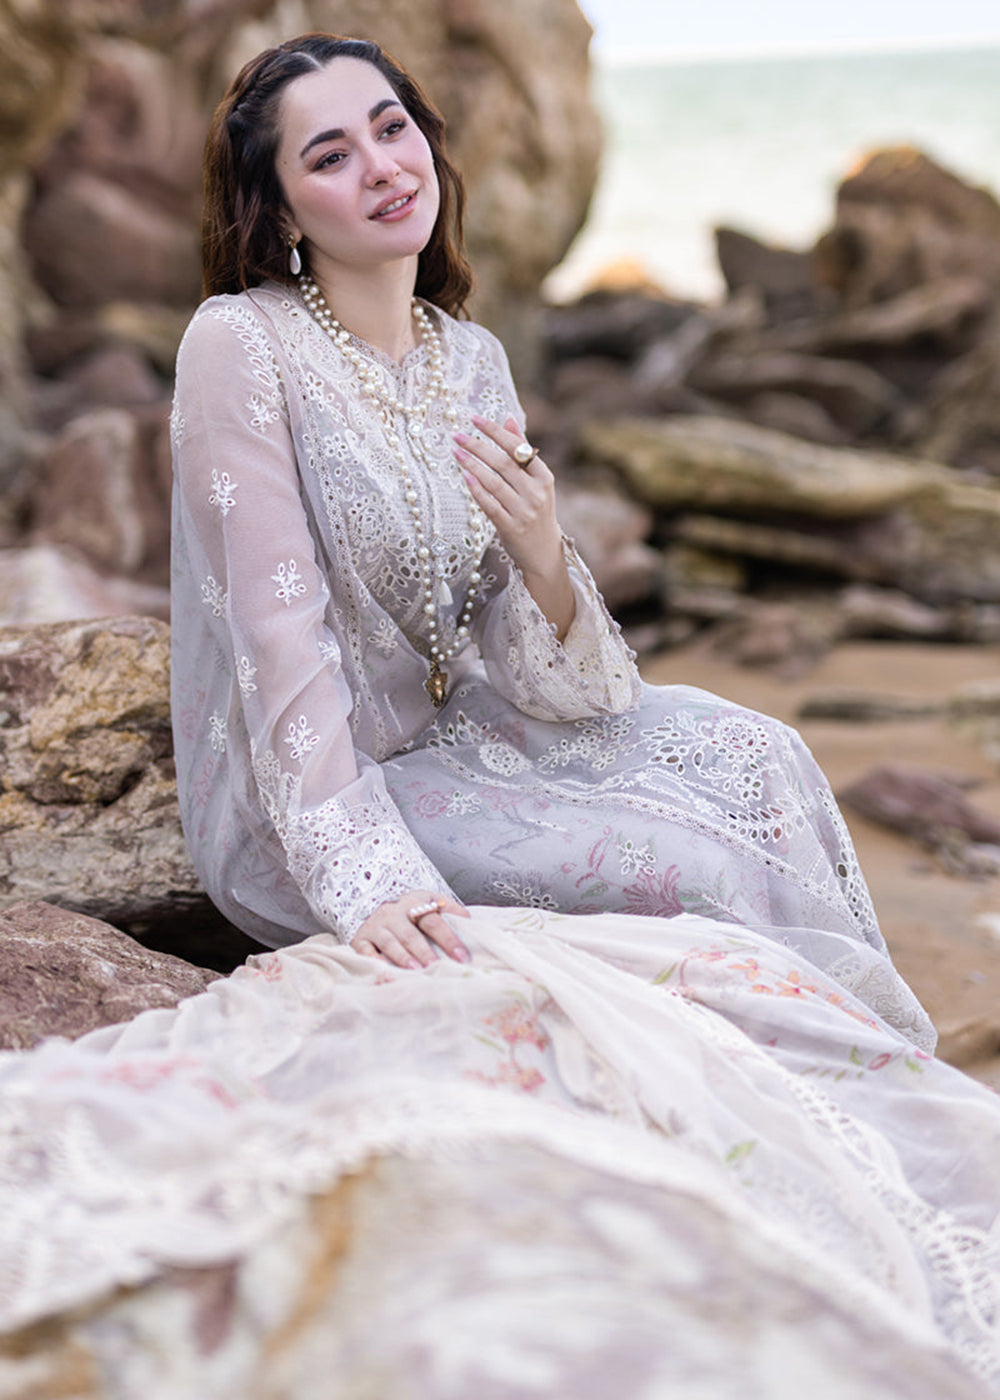 Buy Now Sahil Kinare Luxury Lawn '24 by Qalamkar | FP-11 EMIRA Online at Empress Online in USA, UK, Canada & Worldwide at Empress Clothing.